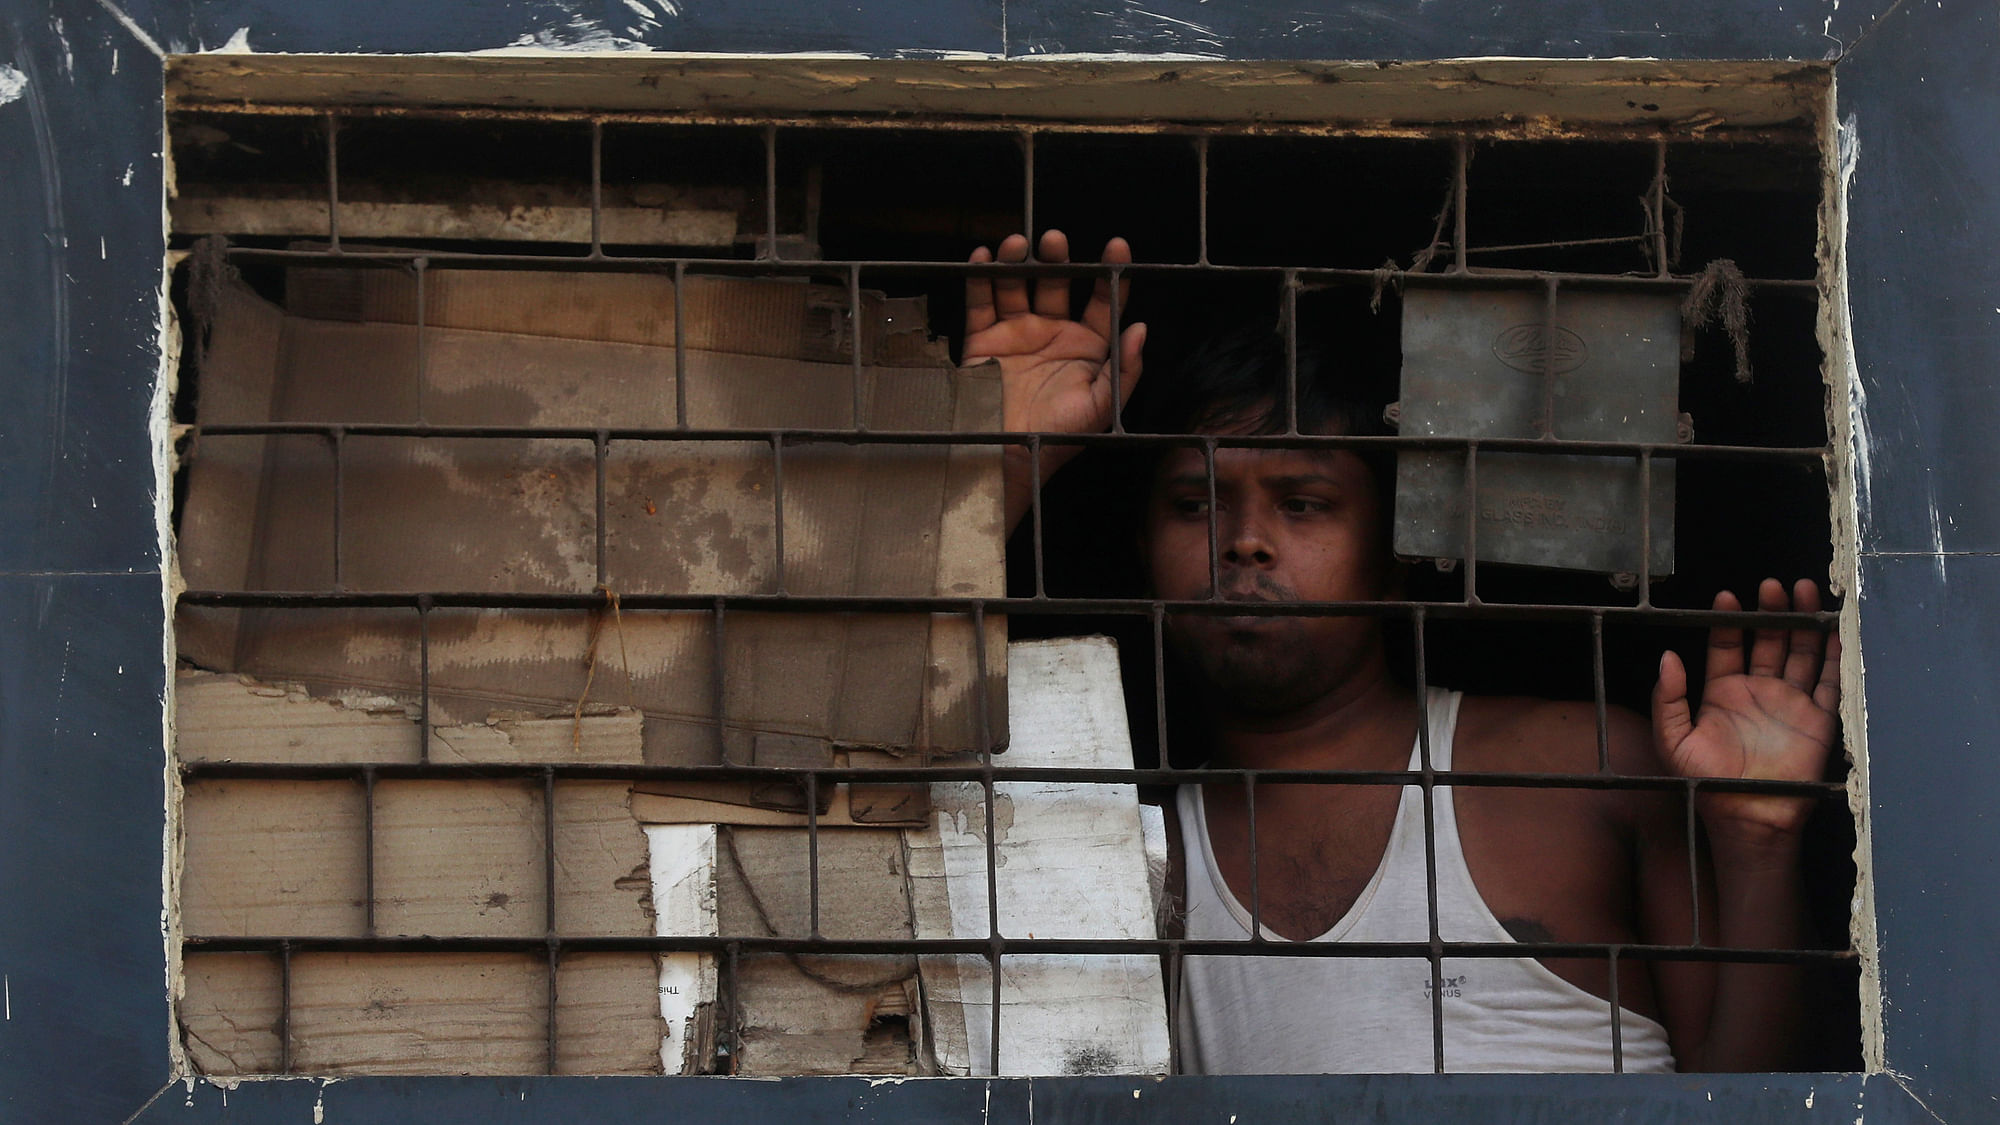 A migrant worker watches through the window of his room as police patrol in Dharavi, one of Asia’s largest slums, during lockdown.